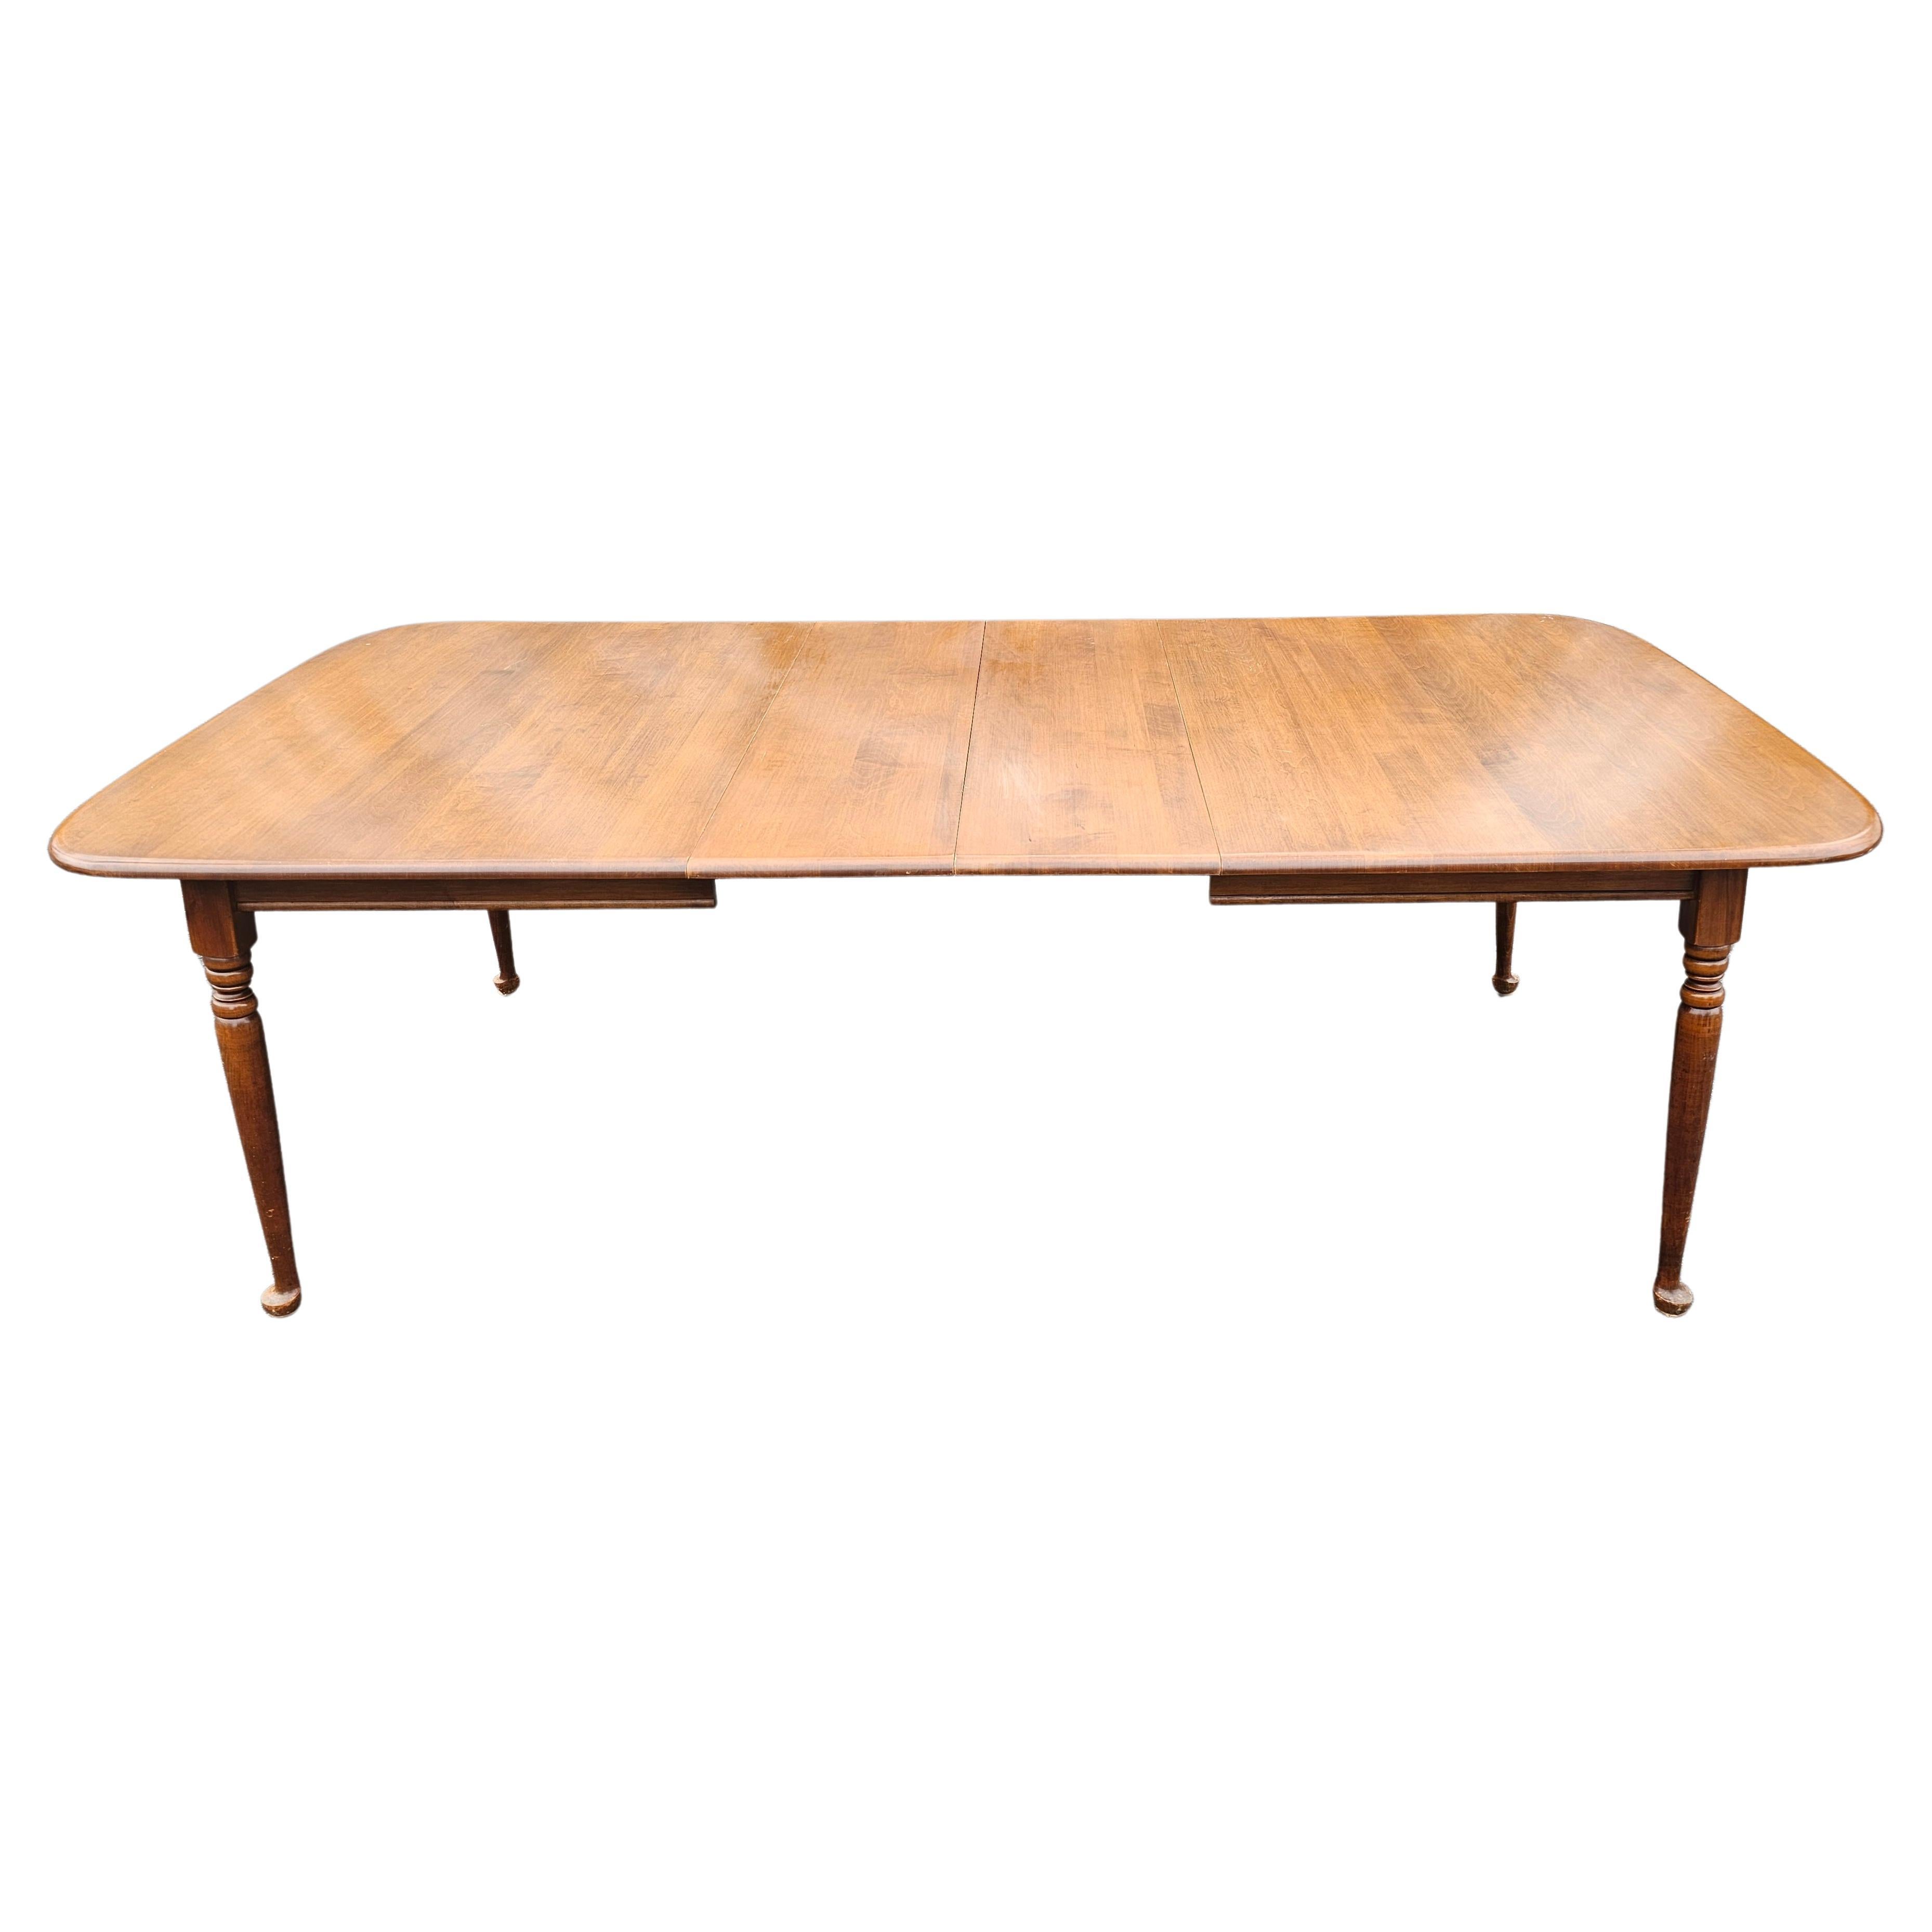 American Heywood Wakefield Maple Cinnamon Colonial Style Extension Dining Table For Sale